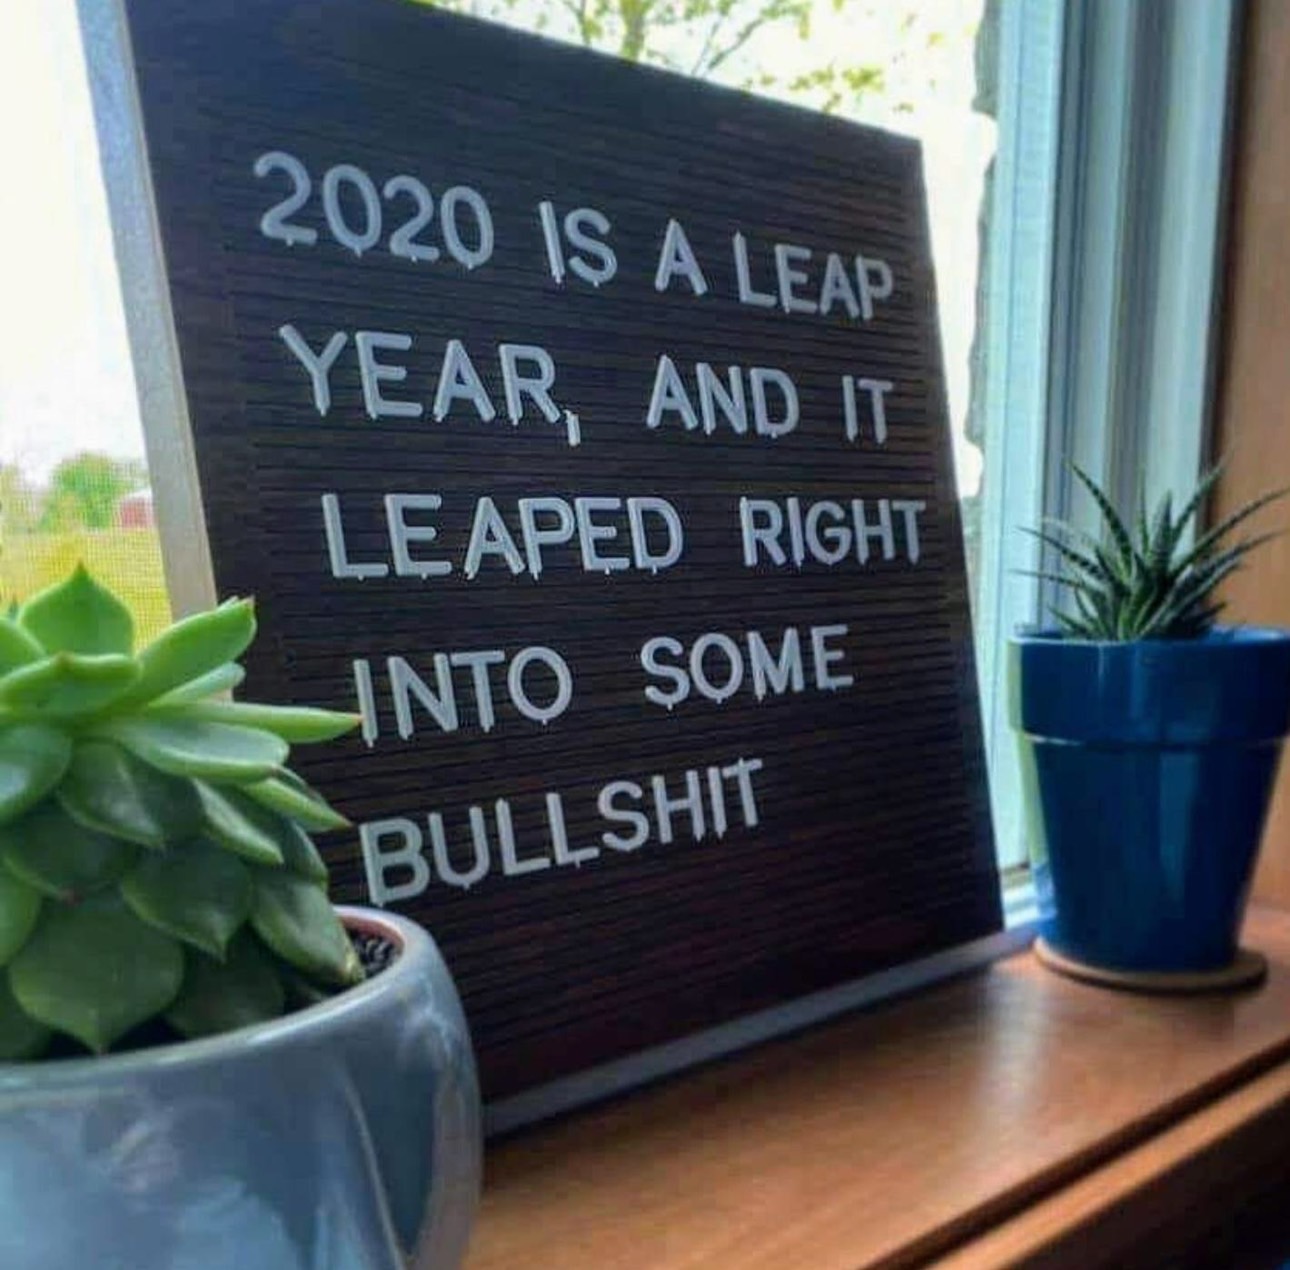 tree - 2020 Is A Leap Year, And It Leaped Right Anto Some Bullshit